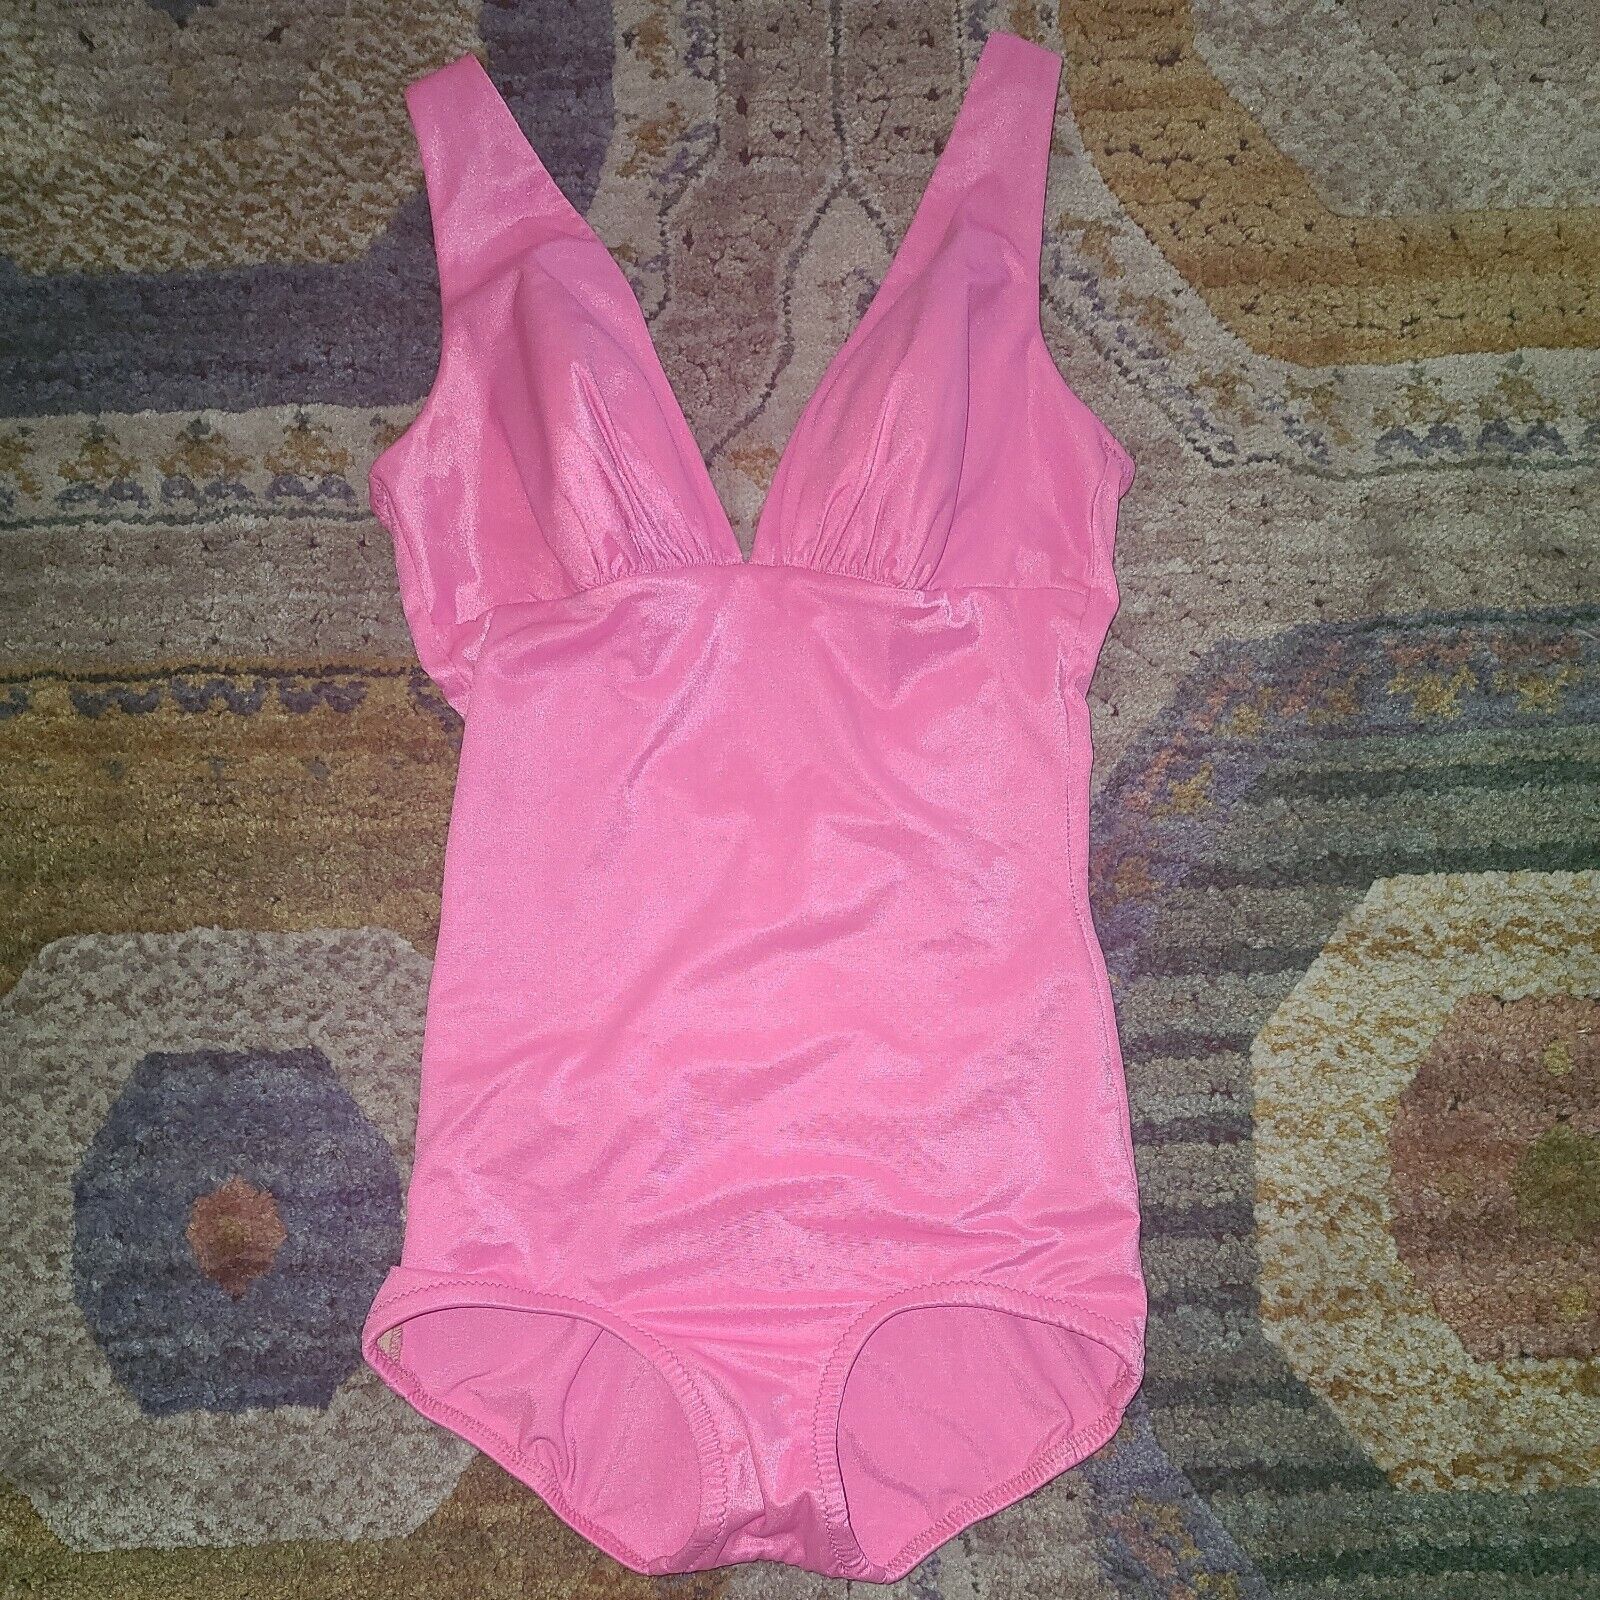 Vintage 1960s Hot Pink One Piece Swimsuit Size Sm… - image 1